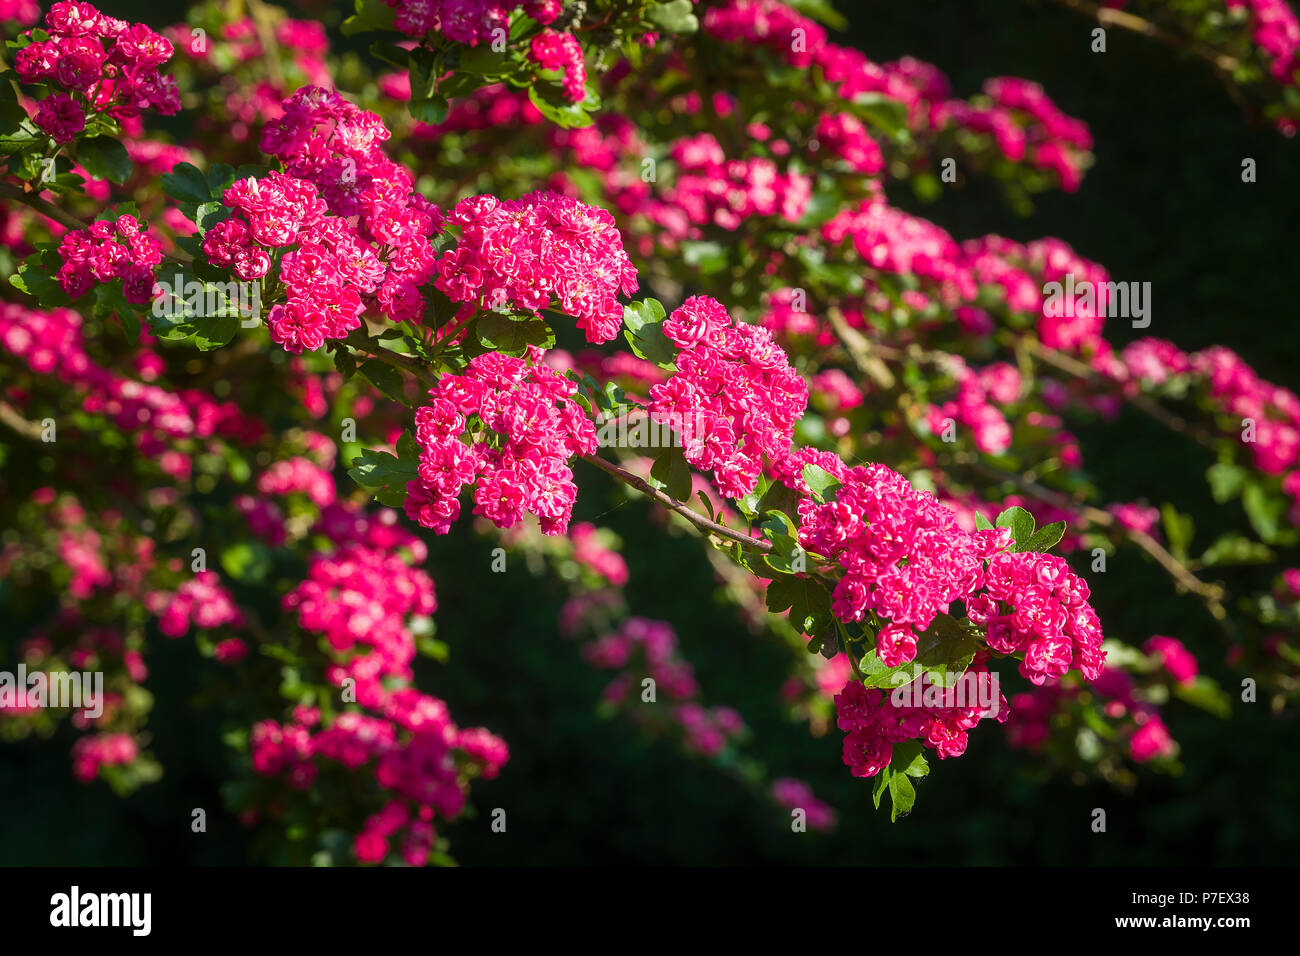 Double-flowered ornamental hawthorn Crataegus Paul's Scarlet in full flower in May in an English garden UK Stock Photo